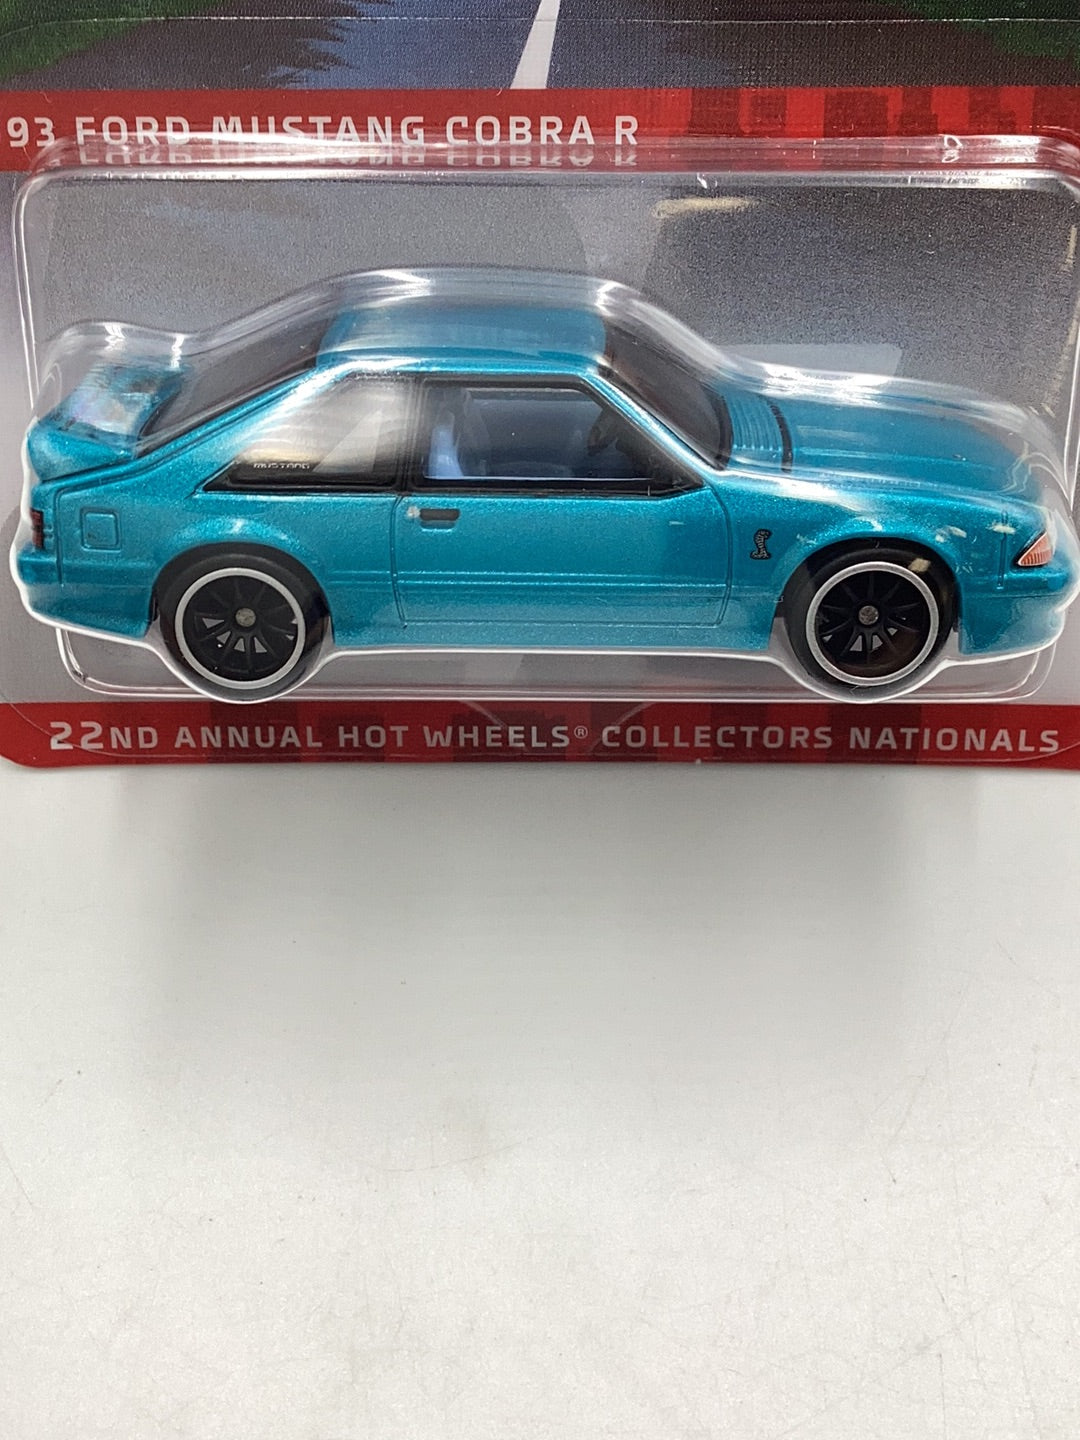 Hot wheels 22nd annual collectors Nationals dinner car 1993 Ford Mustang cobra R 3941/4000 with protector